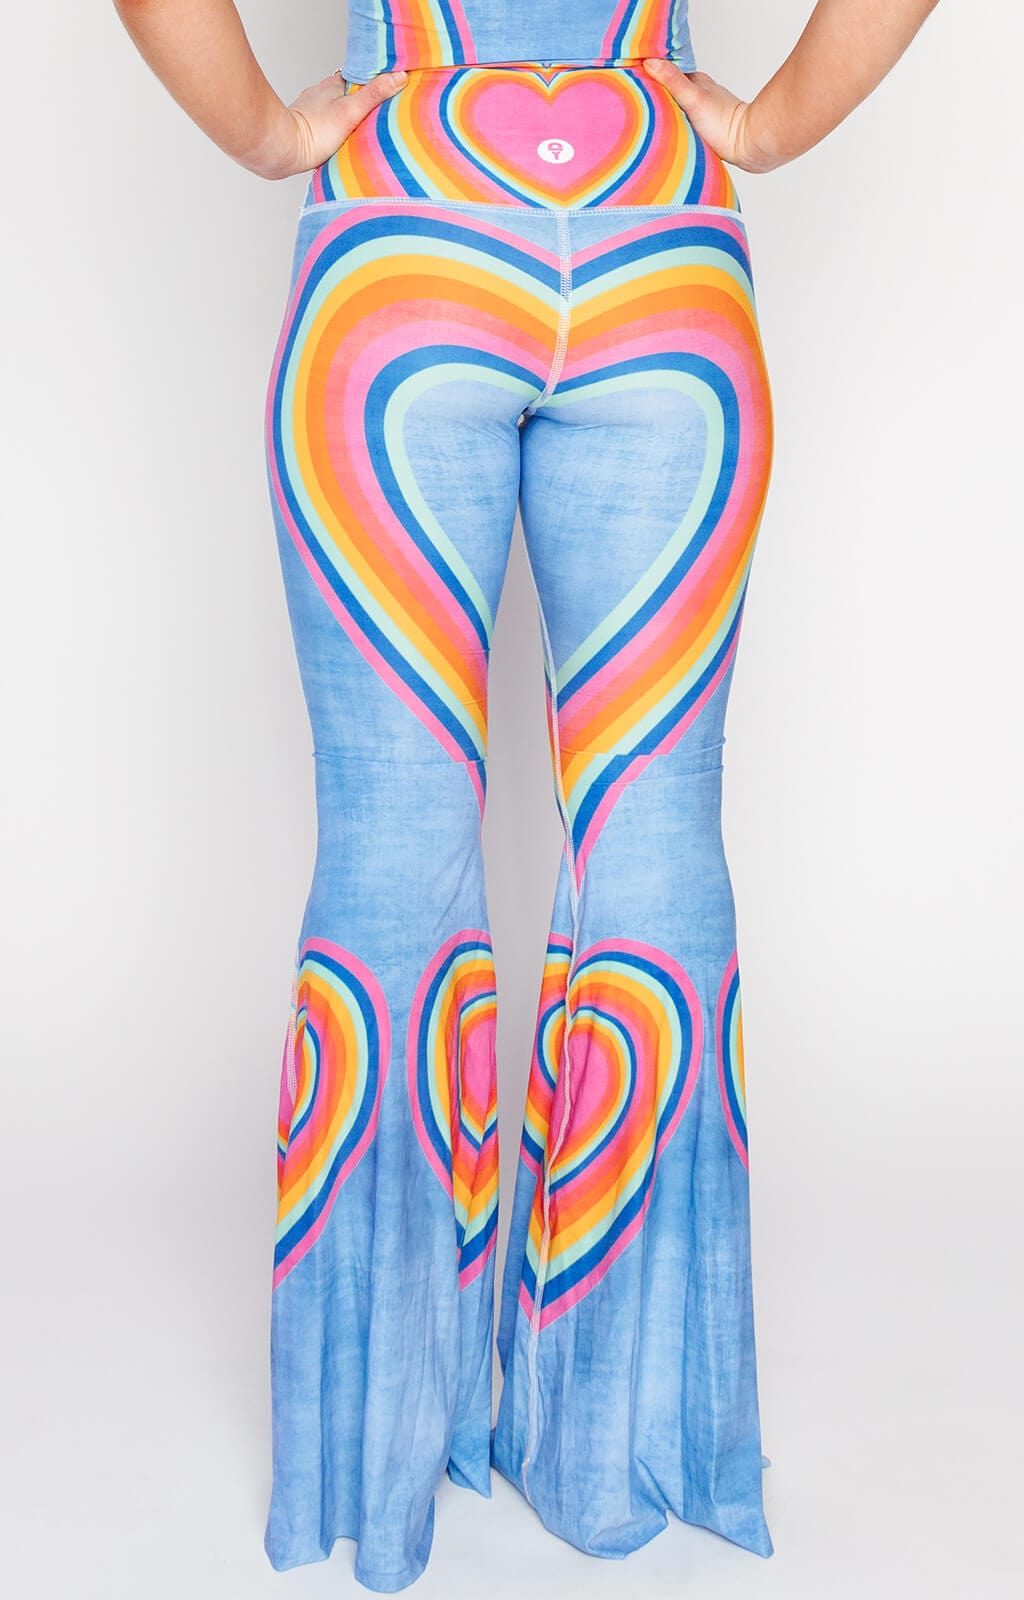 Rainbow Stripe Print Bell Bottom Flares Leggings With High Waist & Stretchy  Spandex Fit 151255 